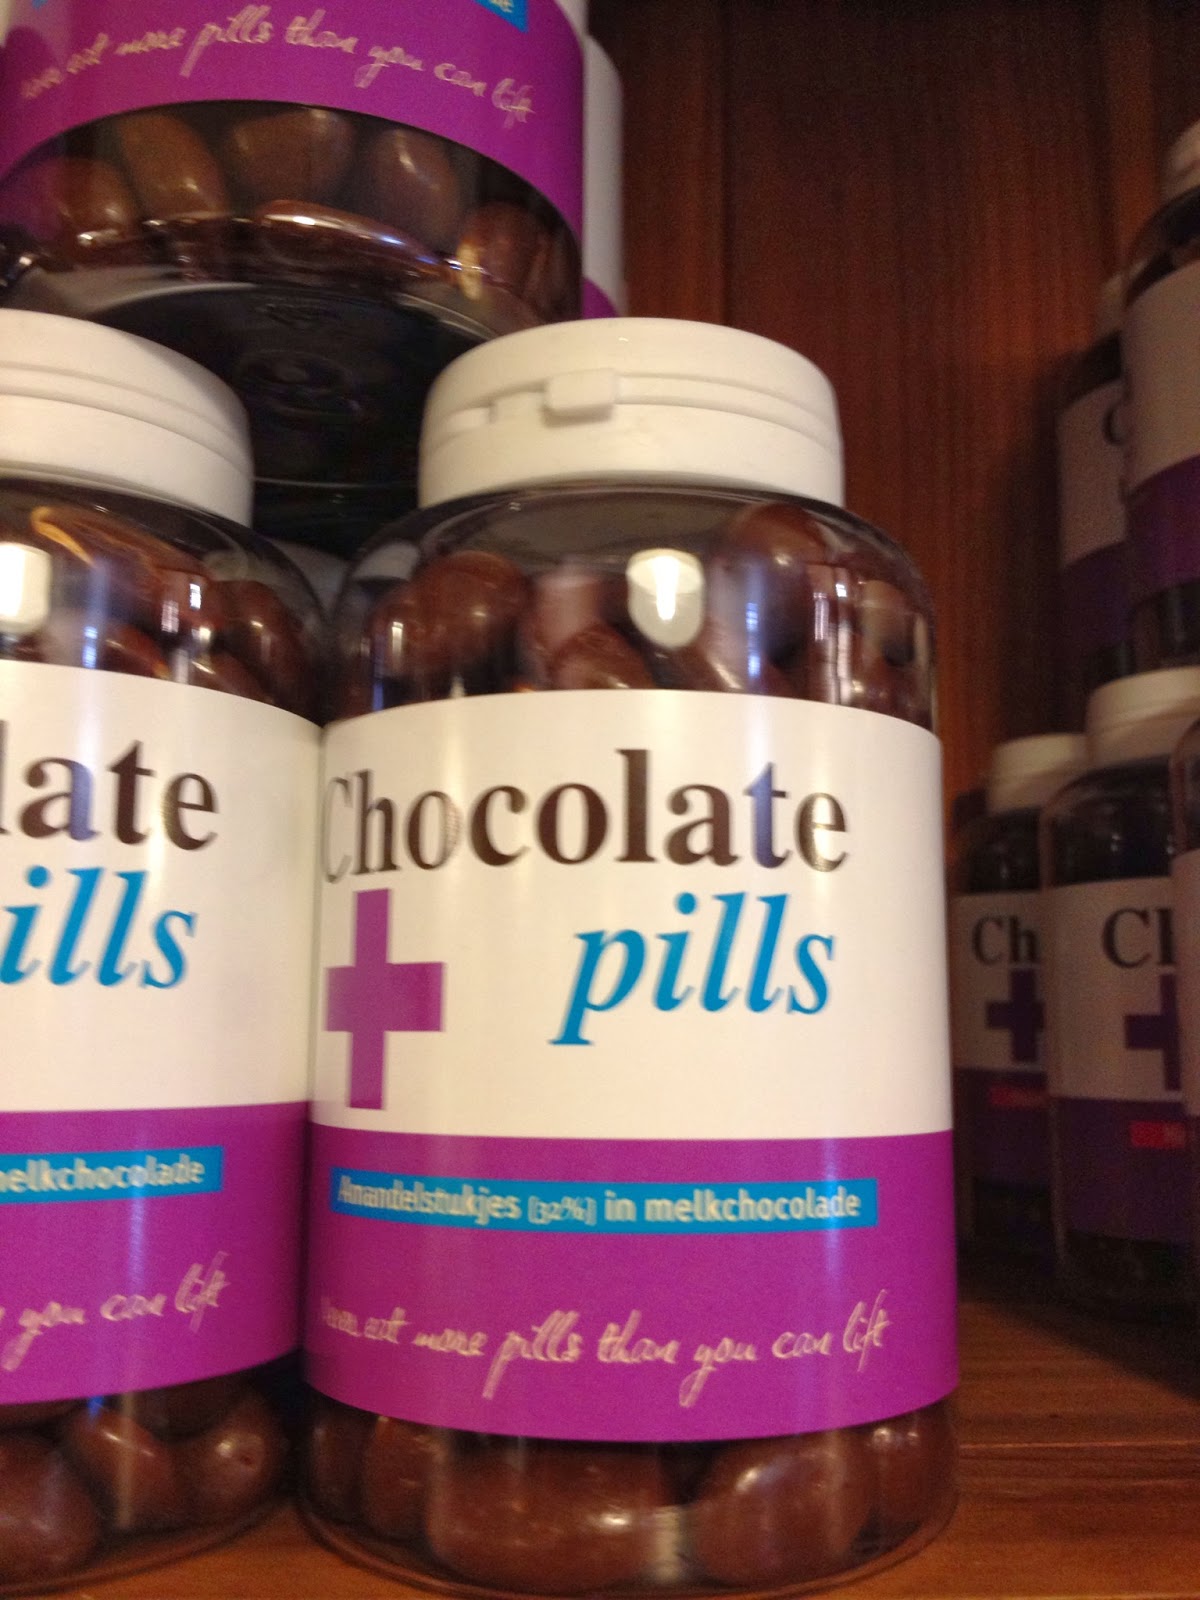 Bruges - Chocolate pills at The Chocolate Line